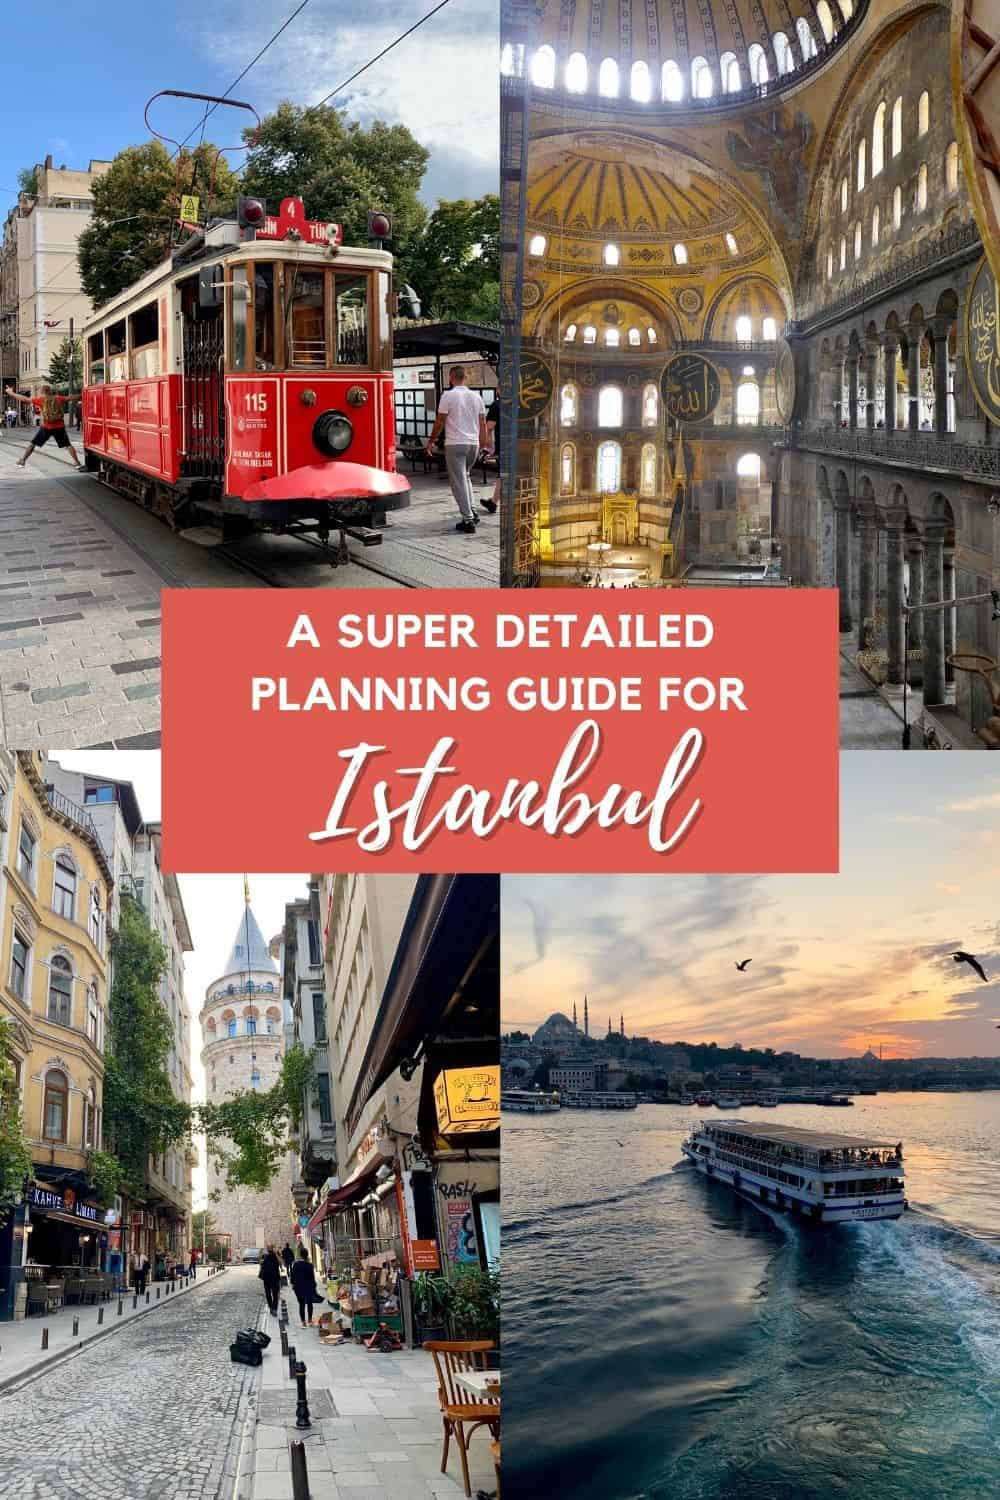 A Detailed Guide & 3+Day Itinerary for Istanbul | Things to do in Istanbul & how to plan the best Istanbul itinerary...what to do, where to eat, where to stay, an Istanbul neighborhood guide, & much more. Visiting Hagia Sophia, Blue Mosque, Mosque of Suleyman the Magnificent, Galata Tower. What to do in Turkey, Istanbul tips. #istanbul #itinerary #turkey #beyoglu #eminonu